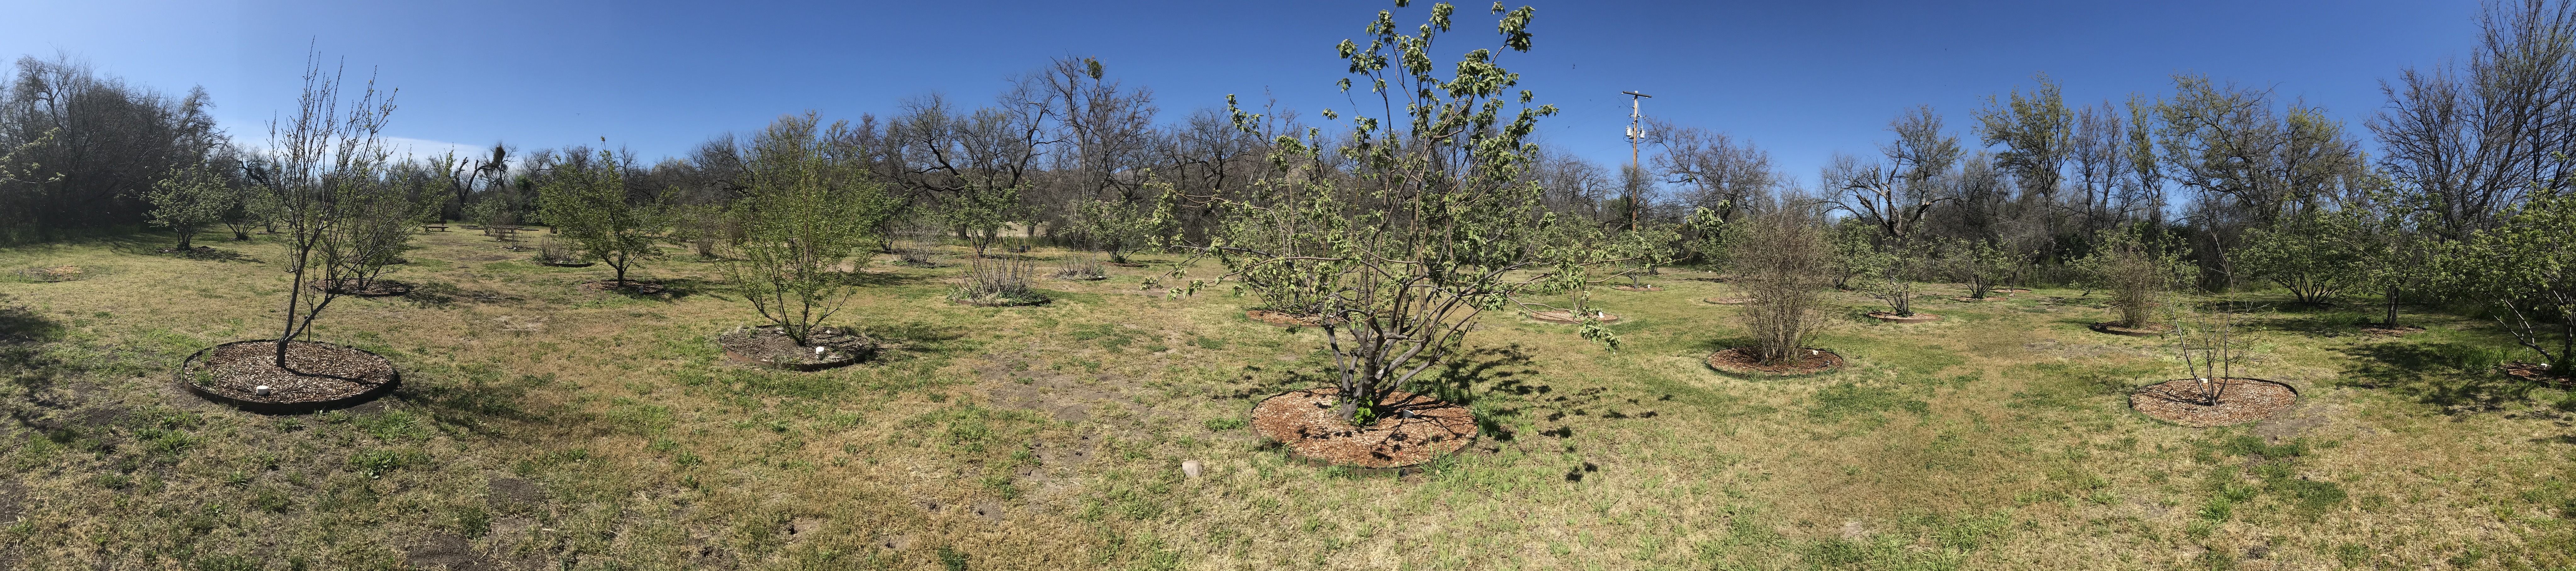 panoramic image of fruit trees including peach, apple, pomegranate